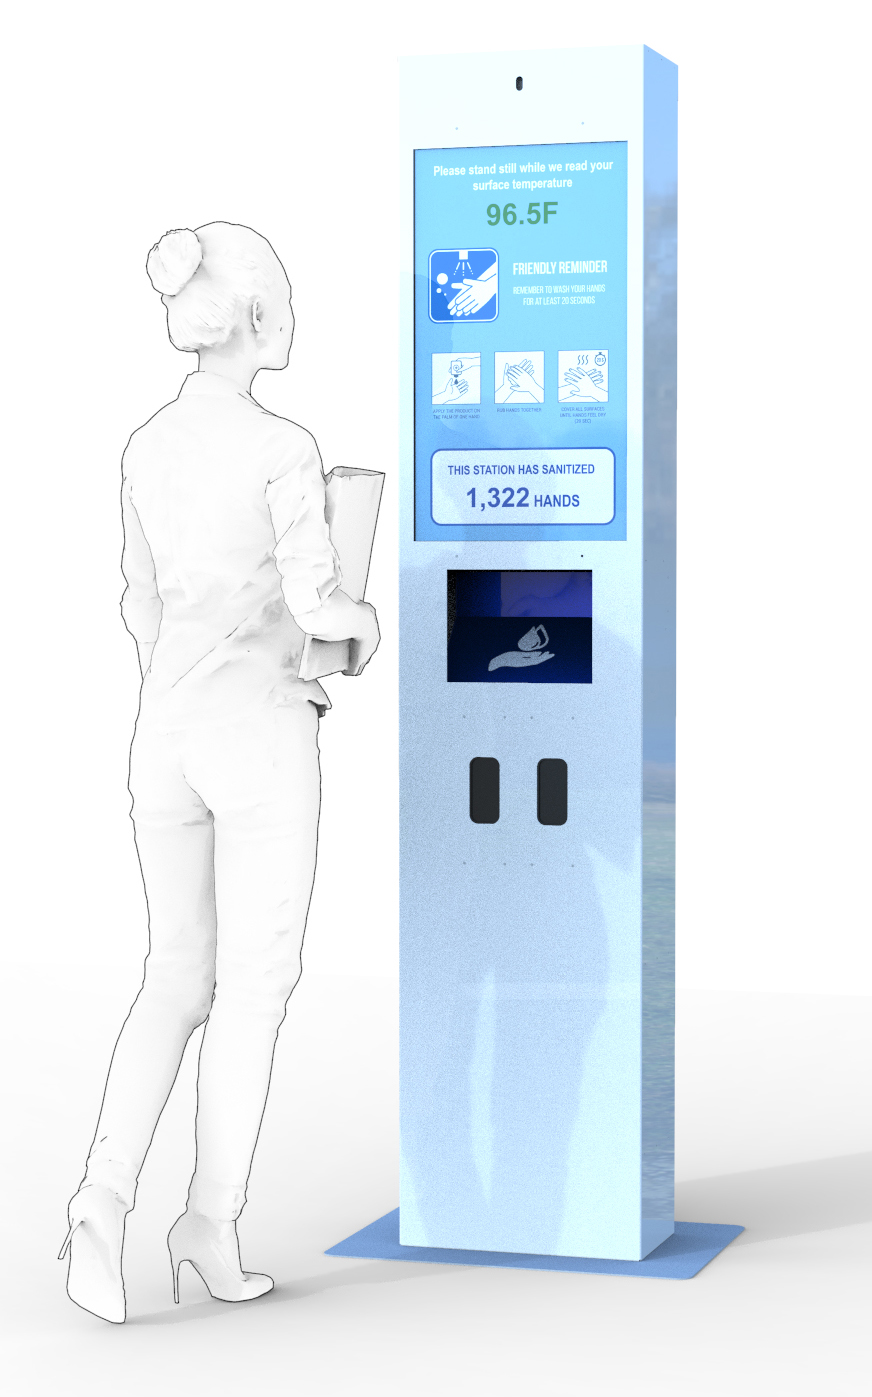 LG's Wellness Kiosks will tell a patron if they have a high temperature, as well as dispense hand sanitizer and masks.